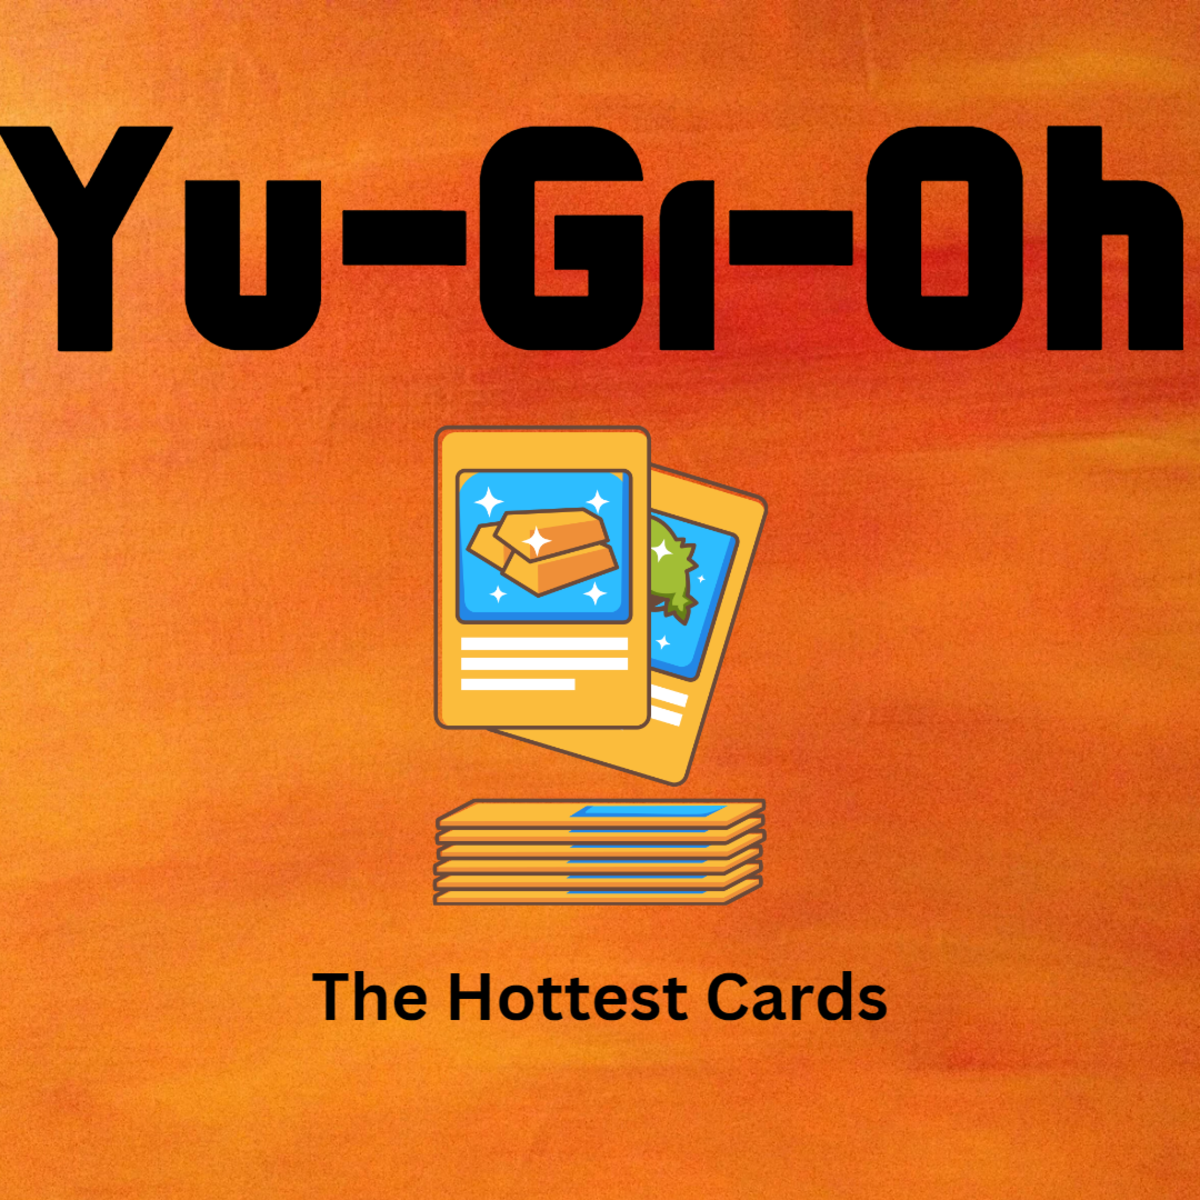 The hottest cards in Yu-Gi-Oh, right here, right now!